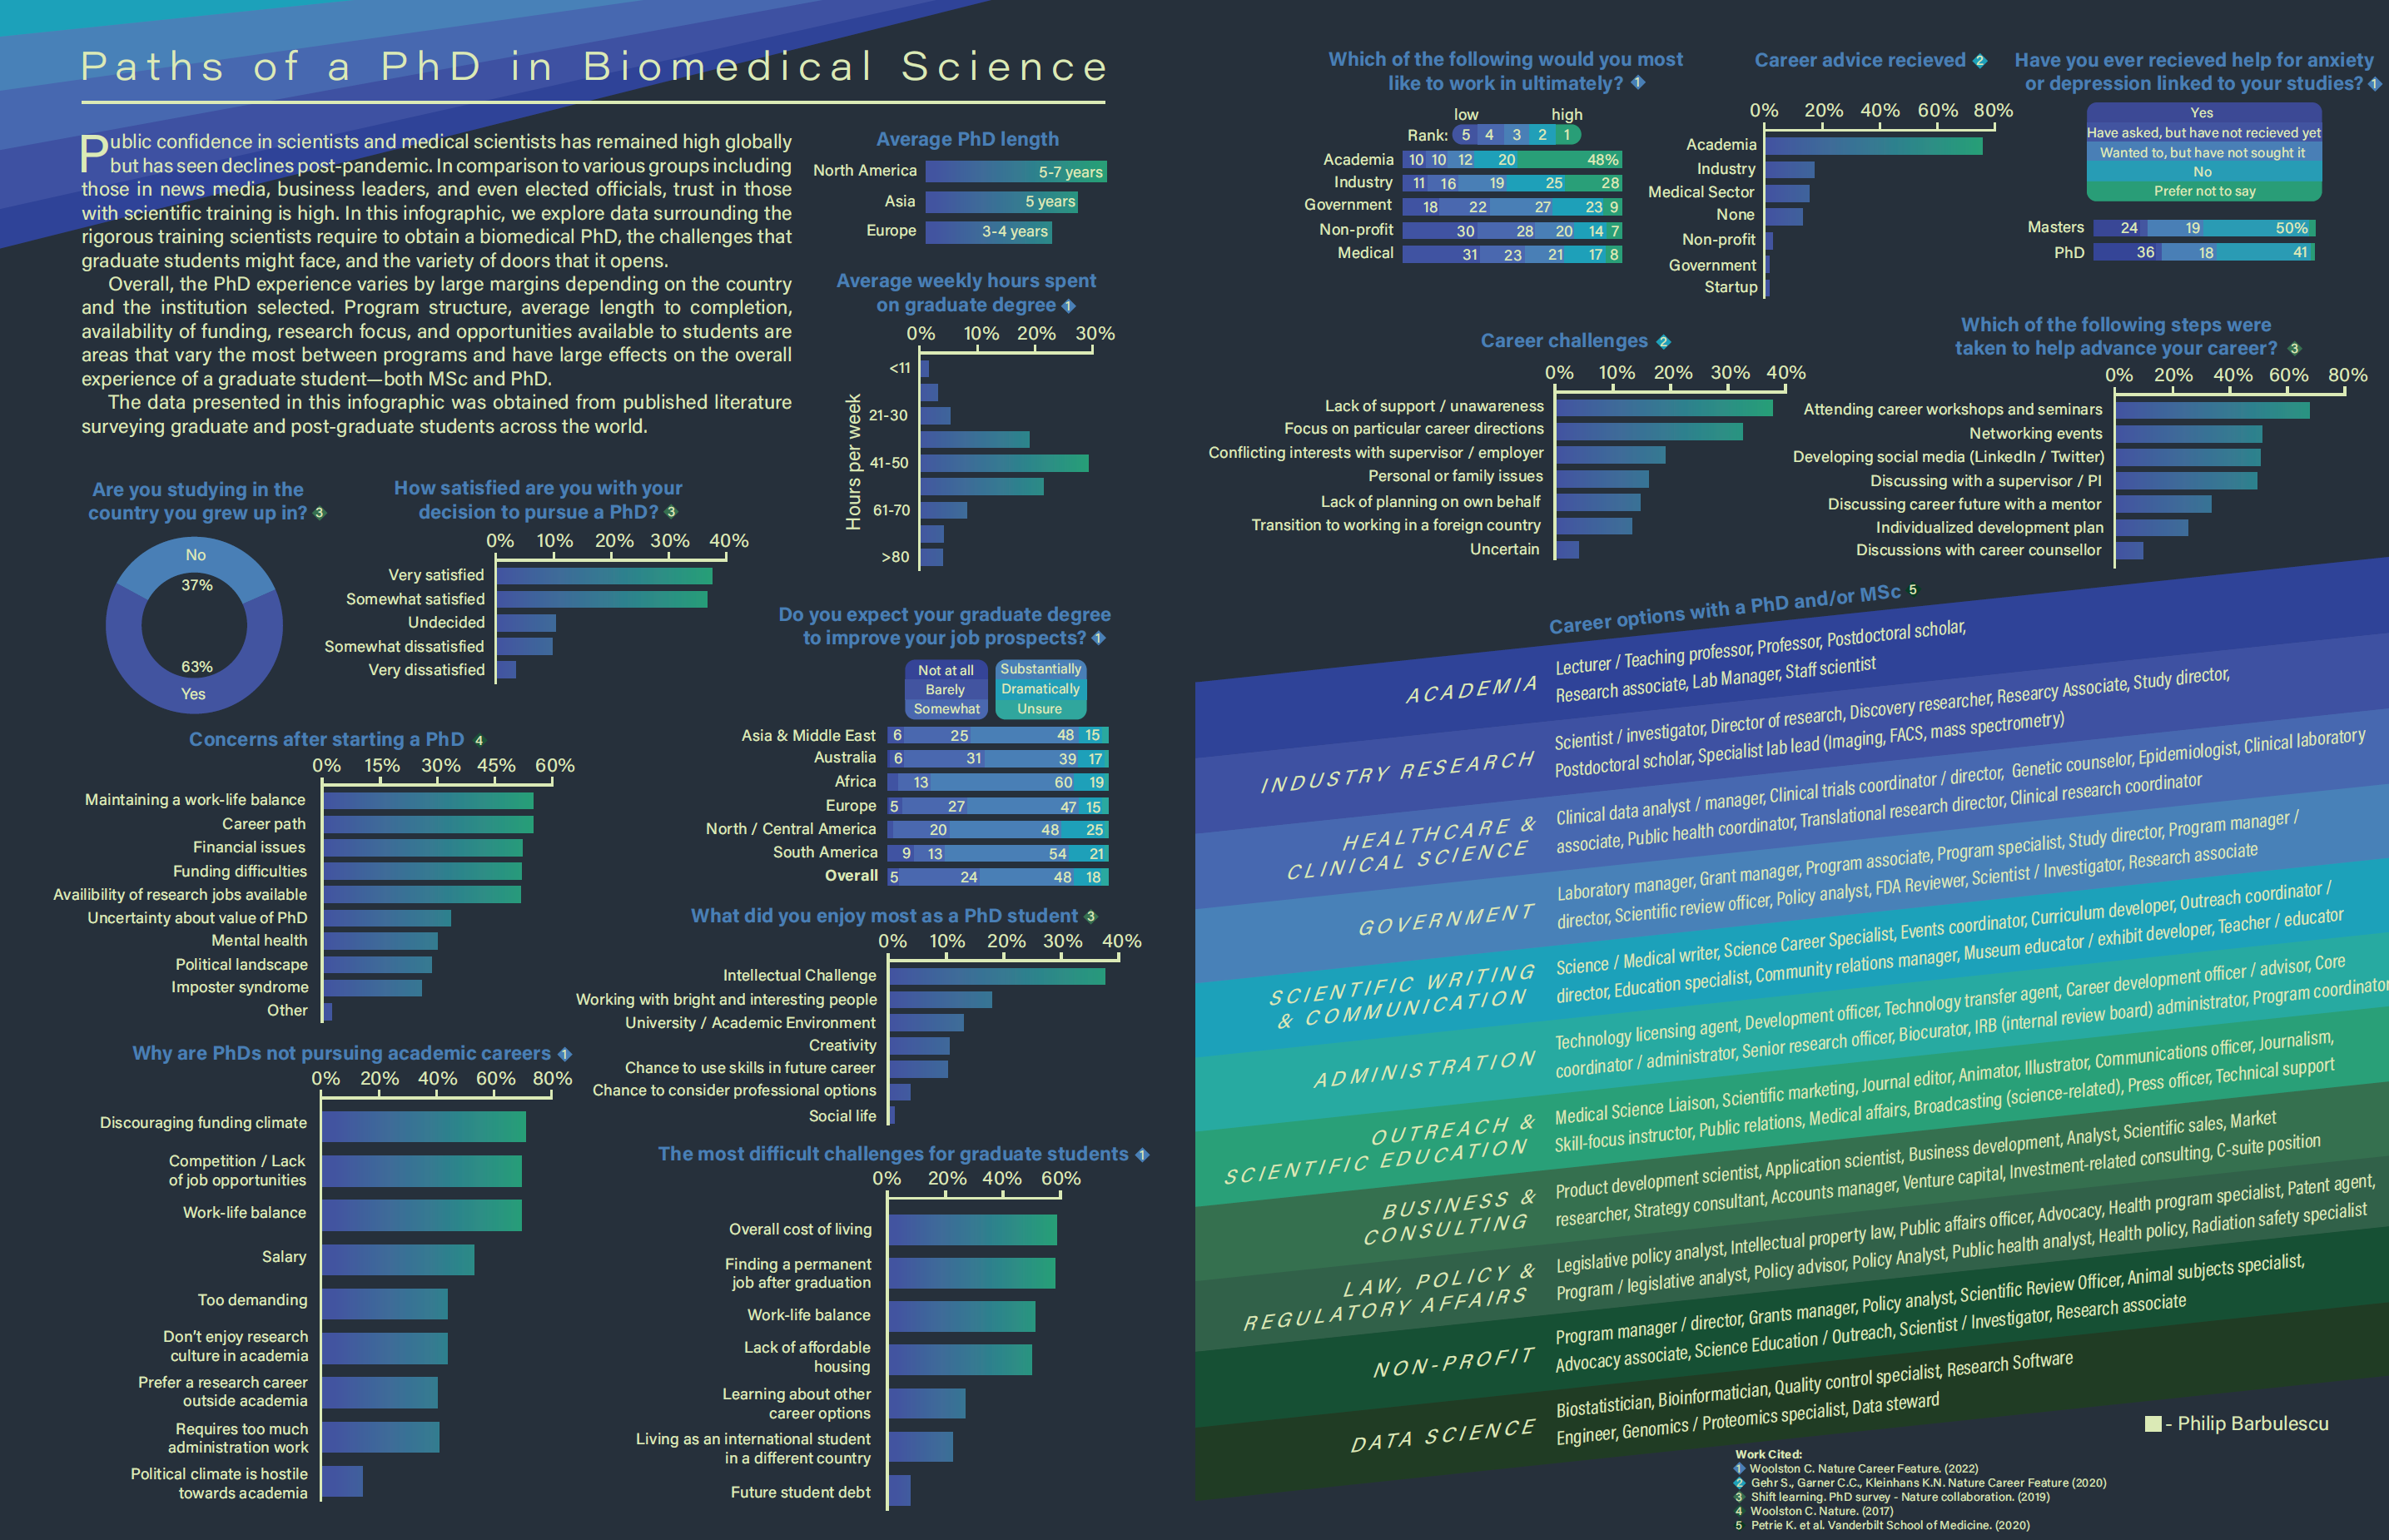 Paths of a PhD in Biomedical Science